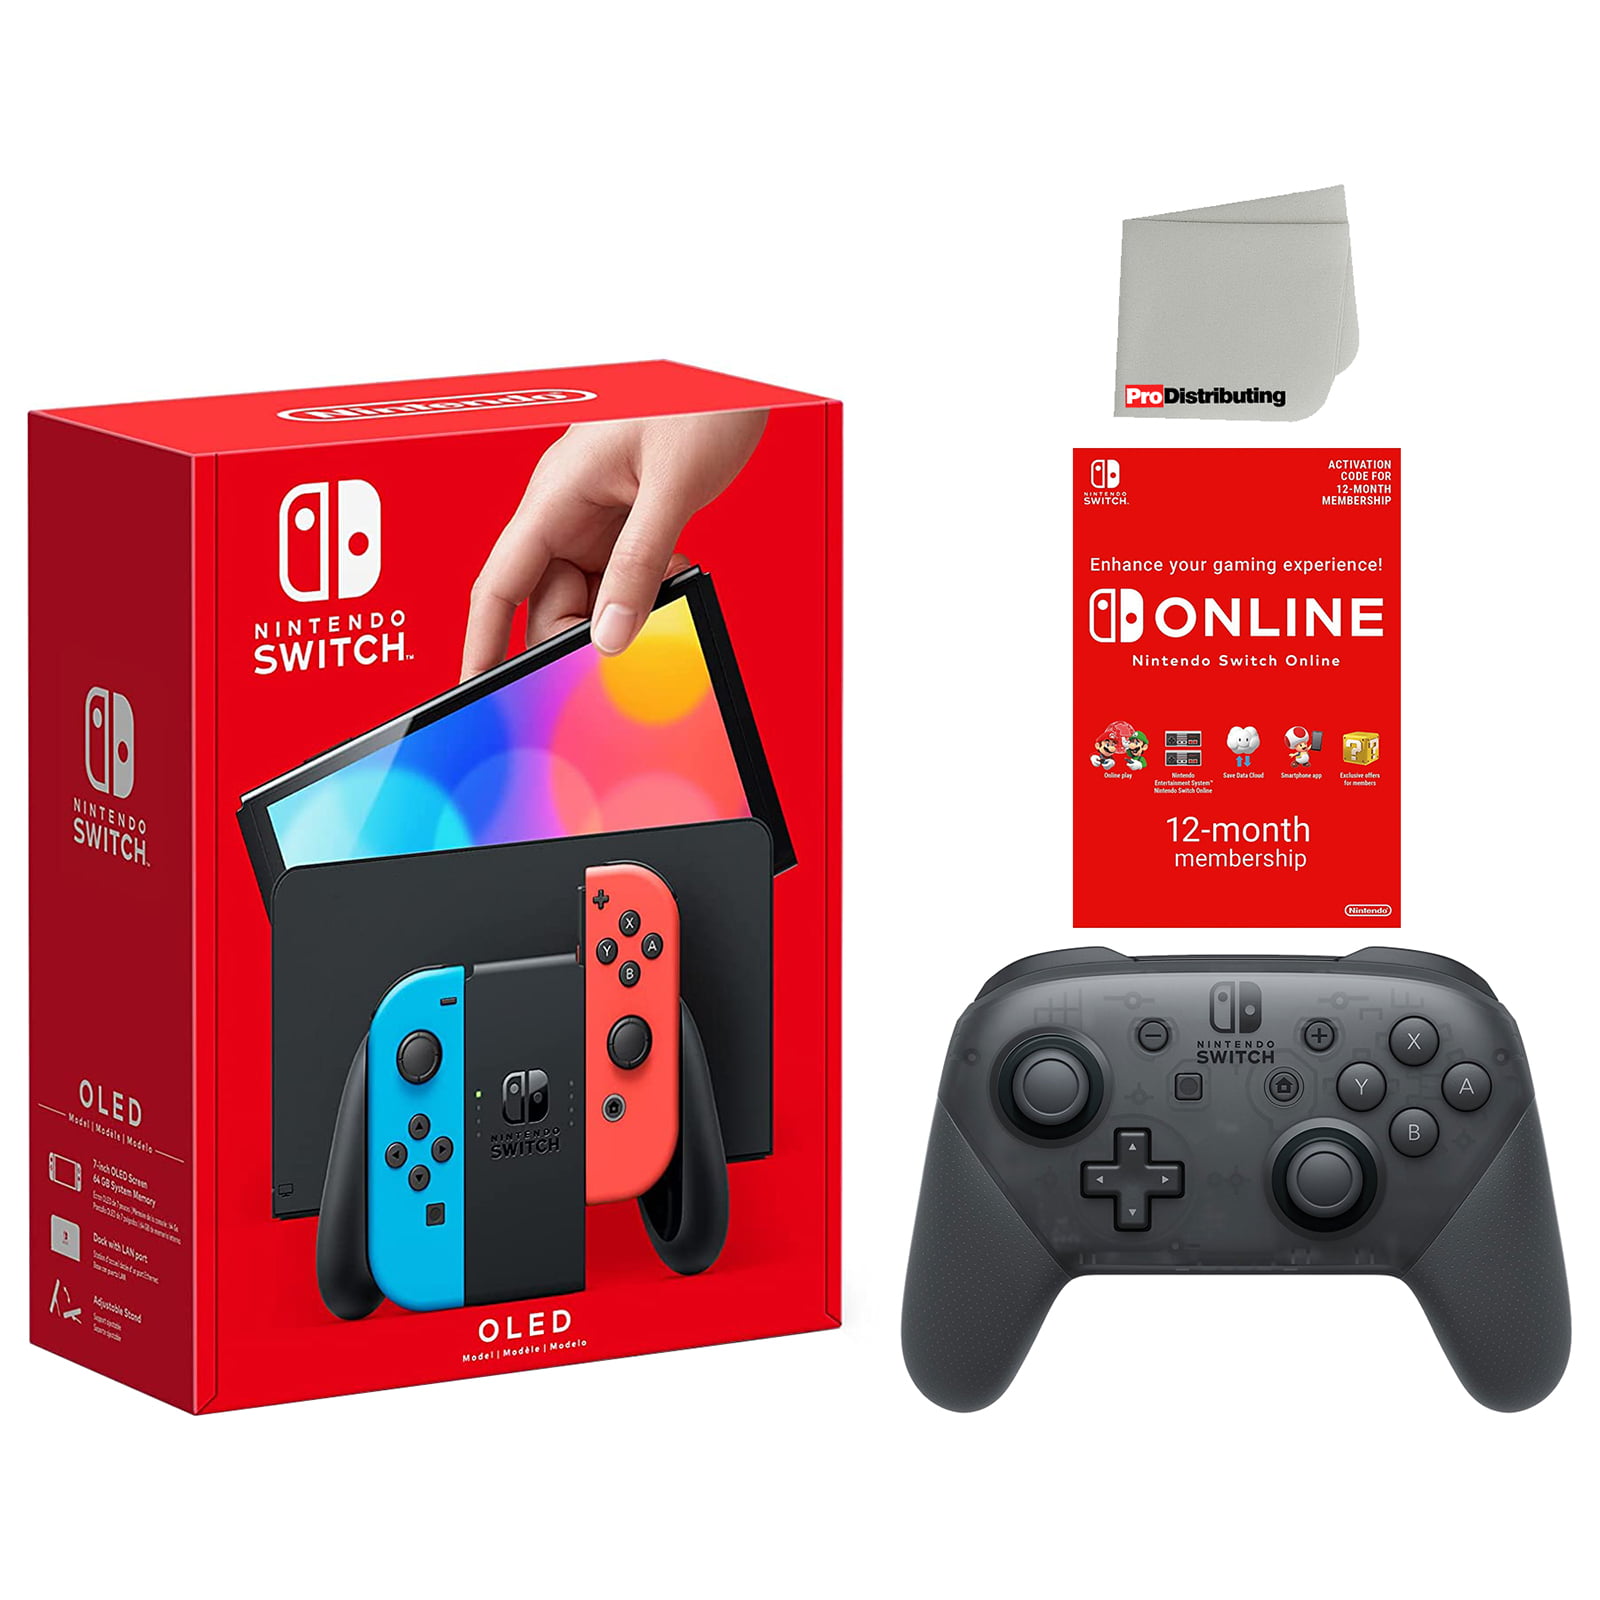 Nintendo Switch OLED Console Neon Joy-Con Bundle with Pro Controller,  Online 12 Month Family Membership and Microfiber Cleaning Cloth - Import  with US Plug